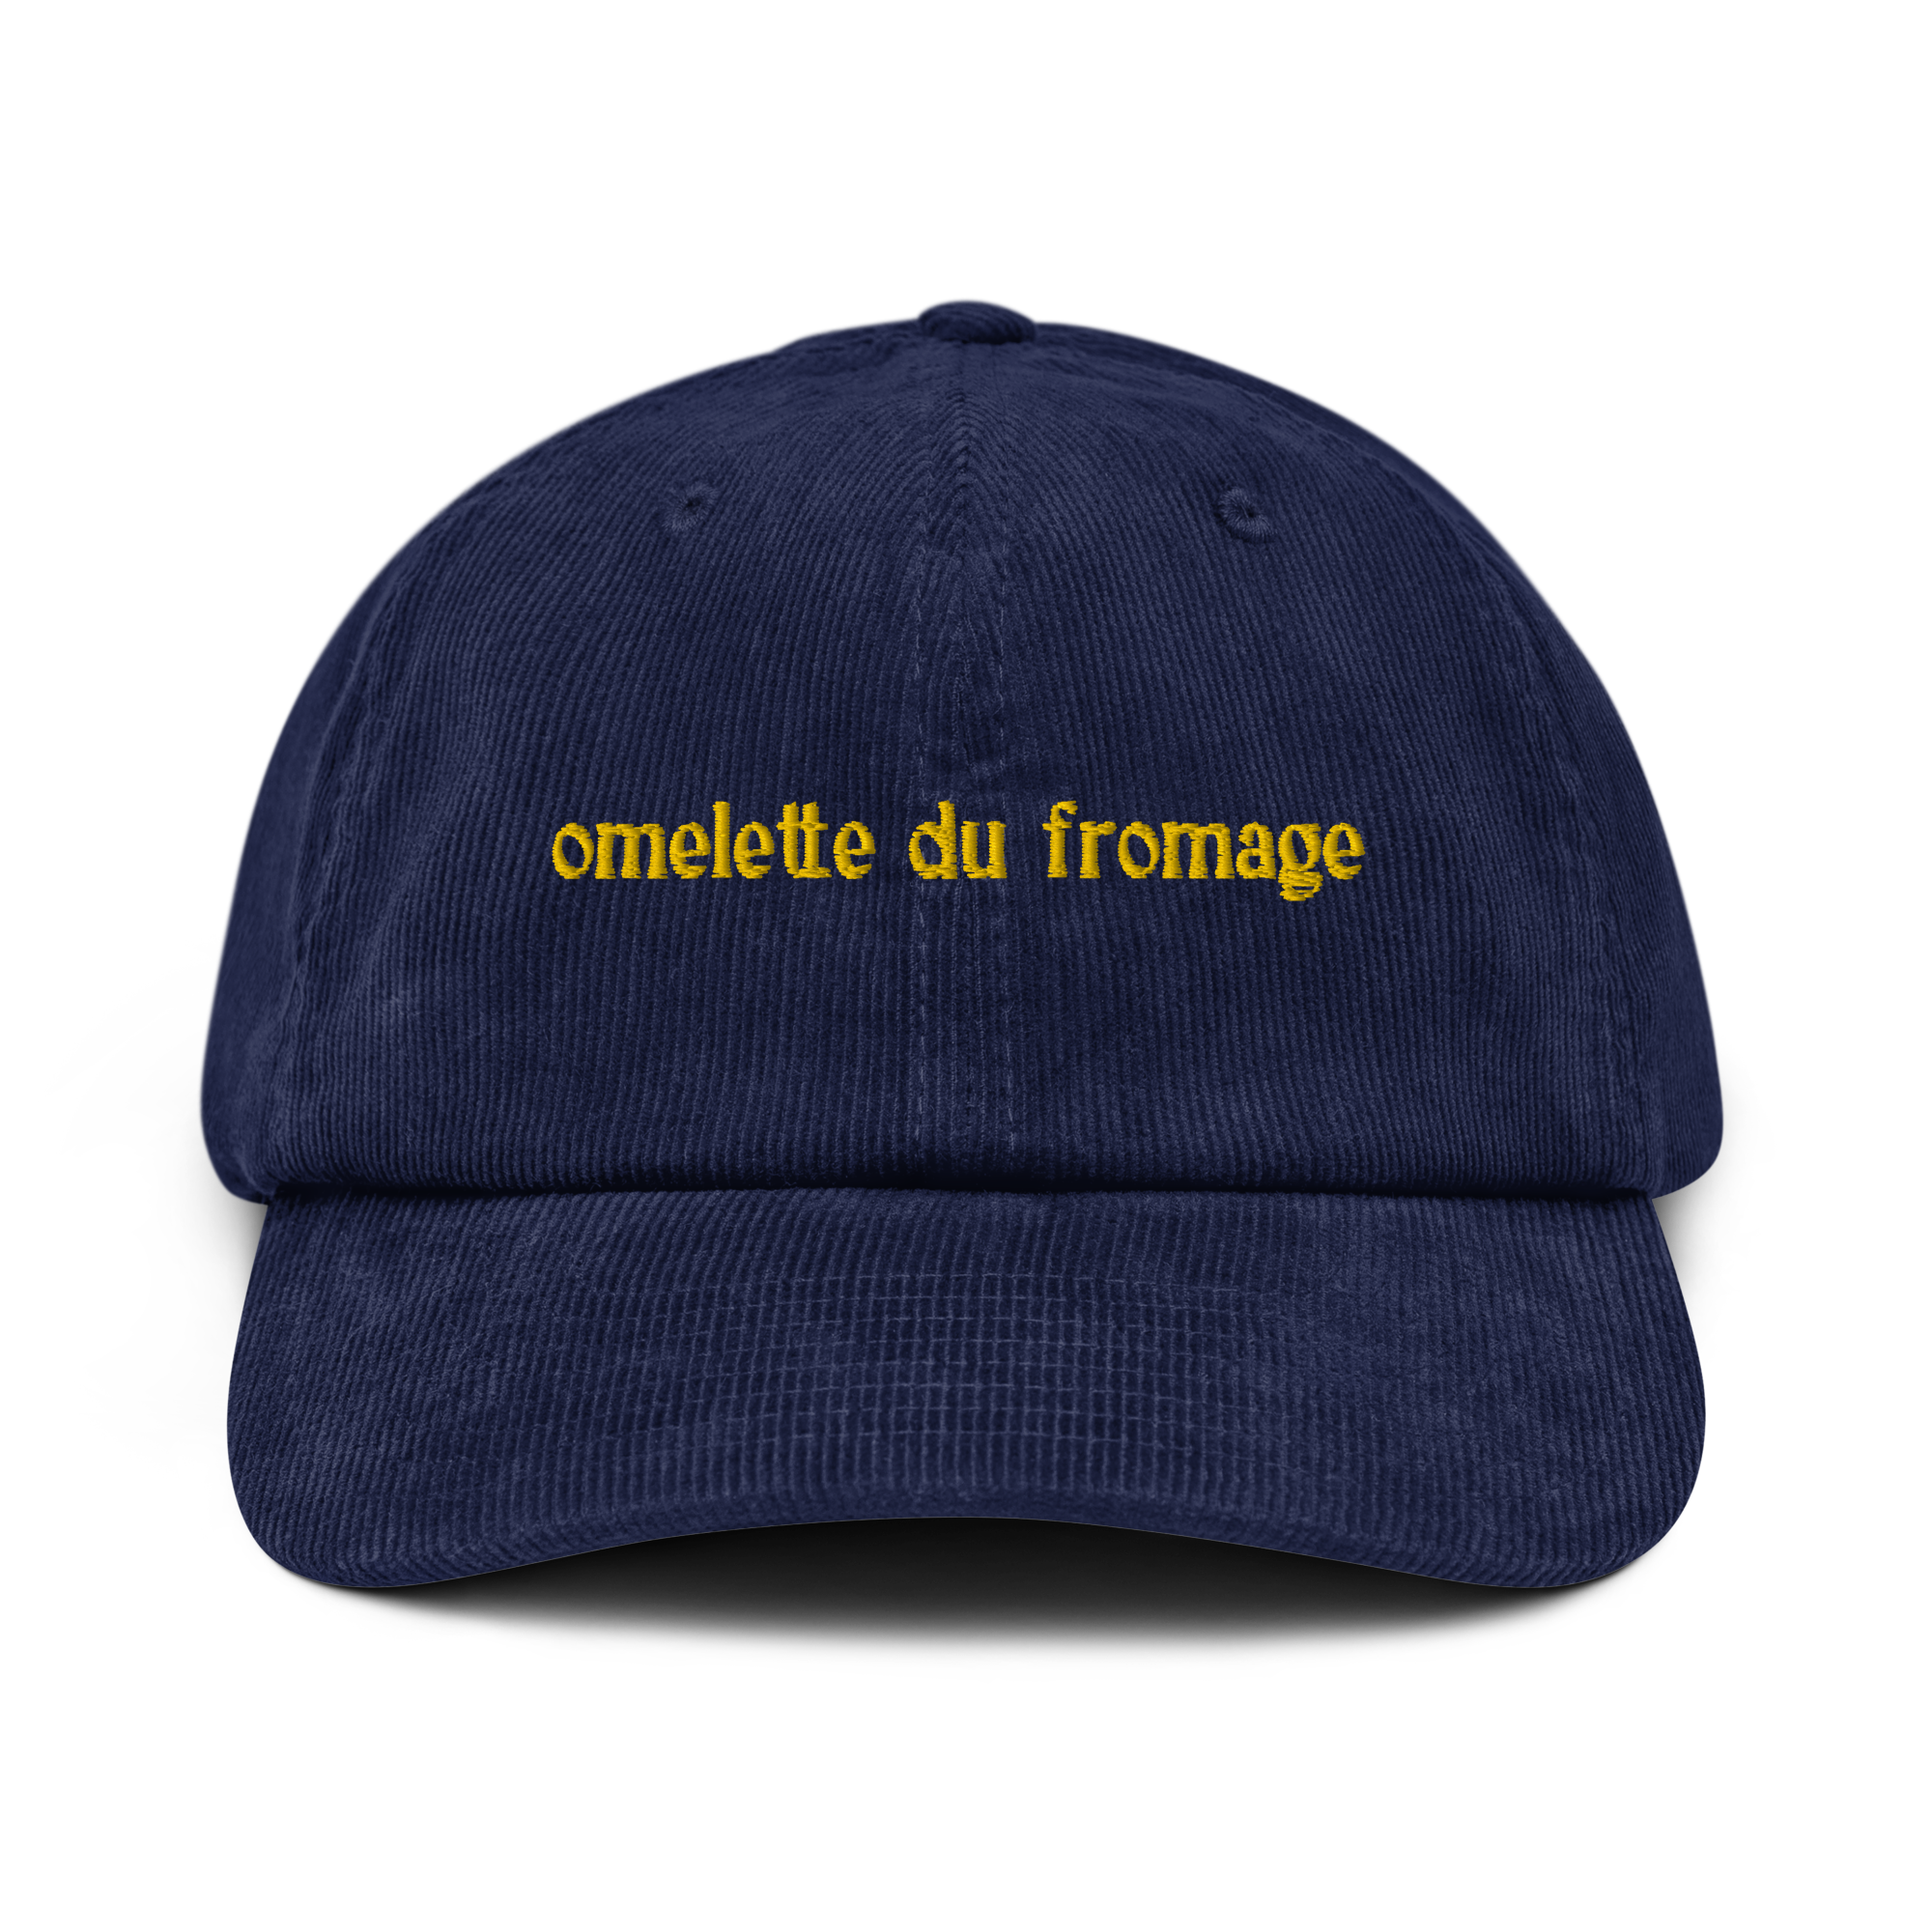 corduroy-hat-oxford-navy-front-6686b8cb65459.png